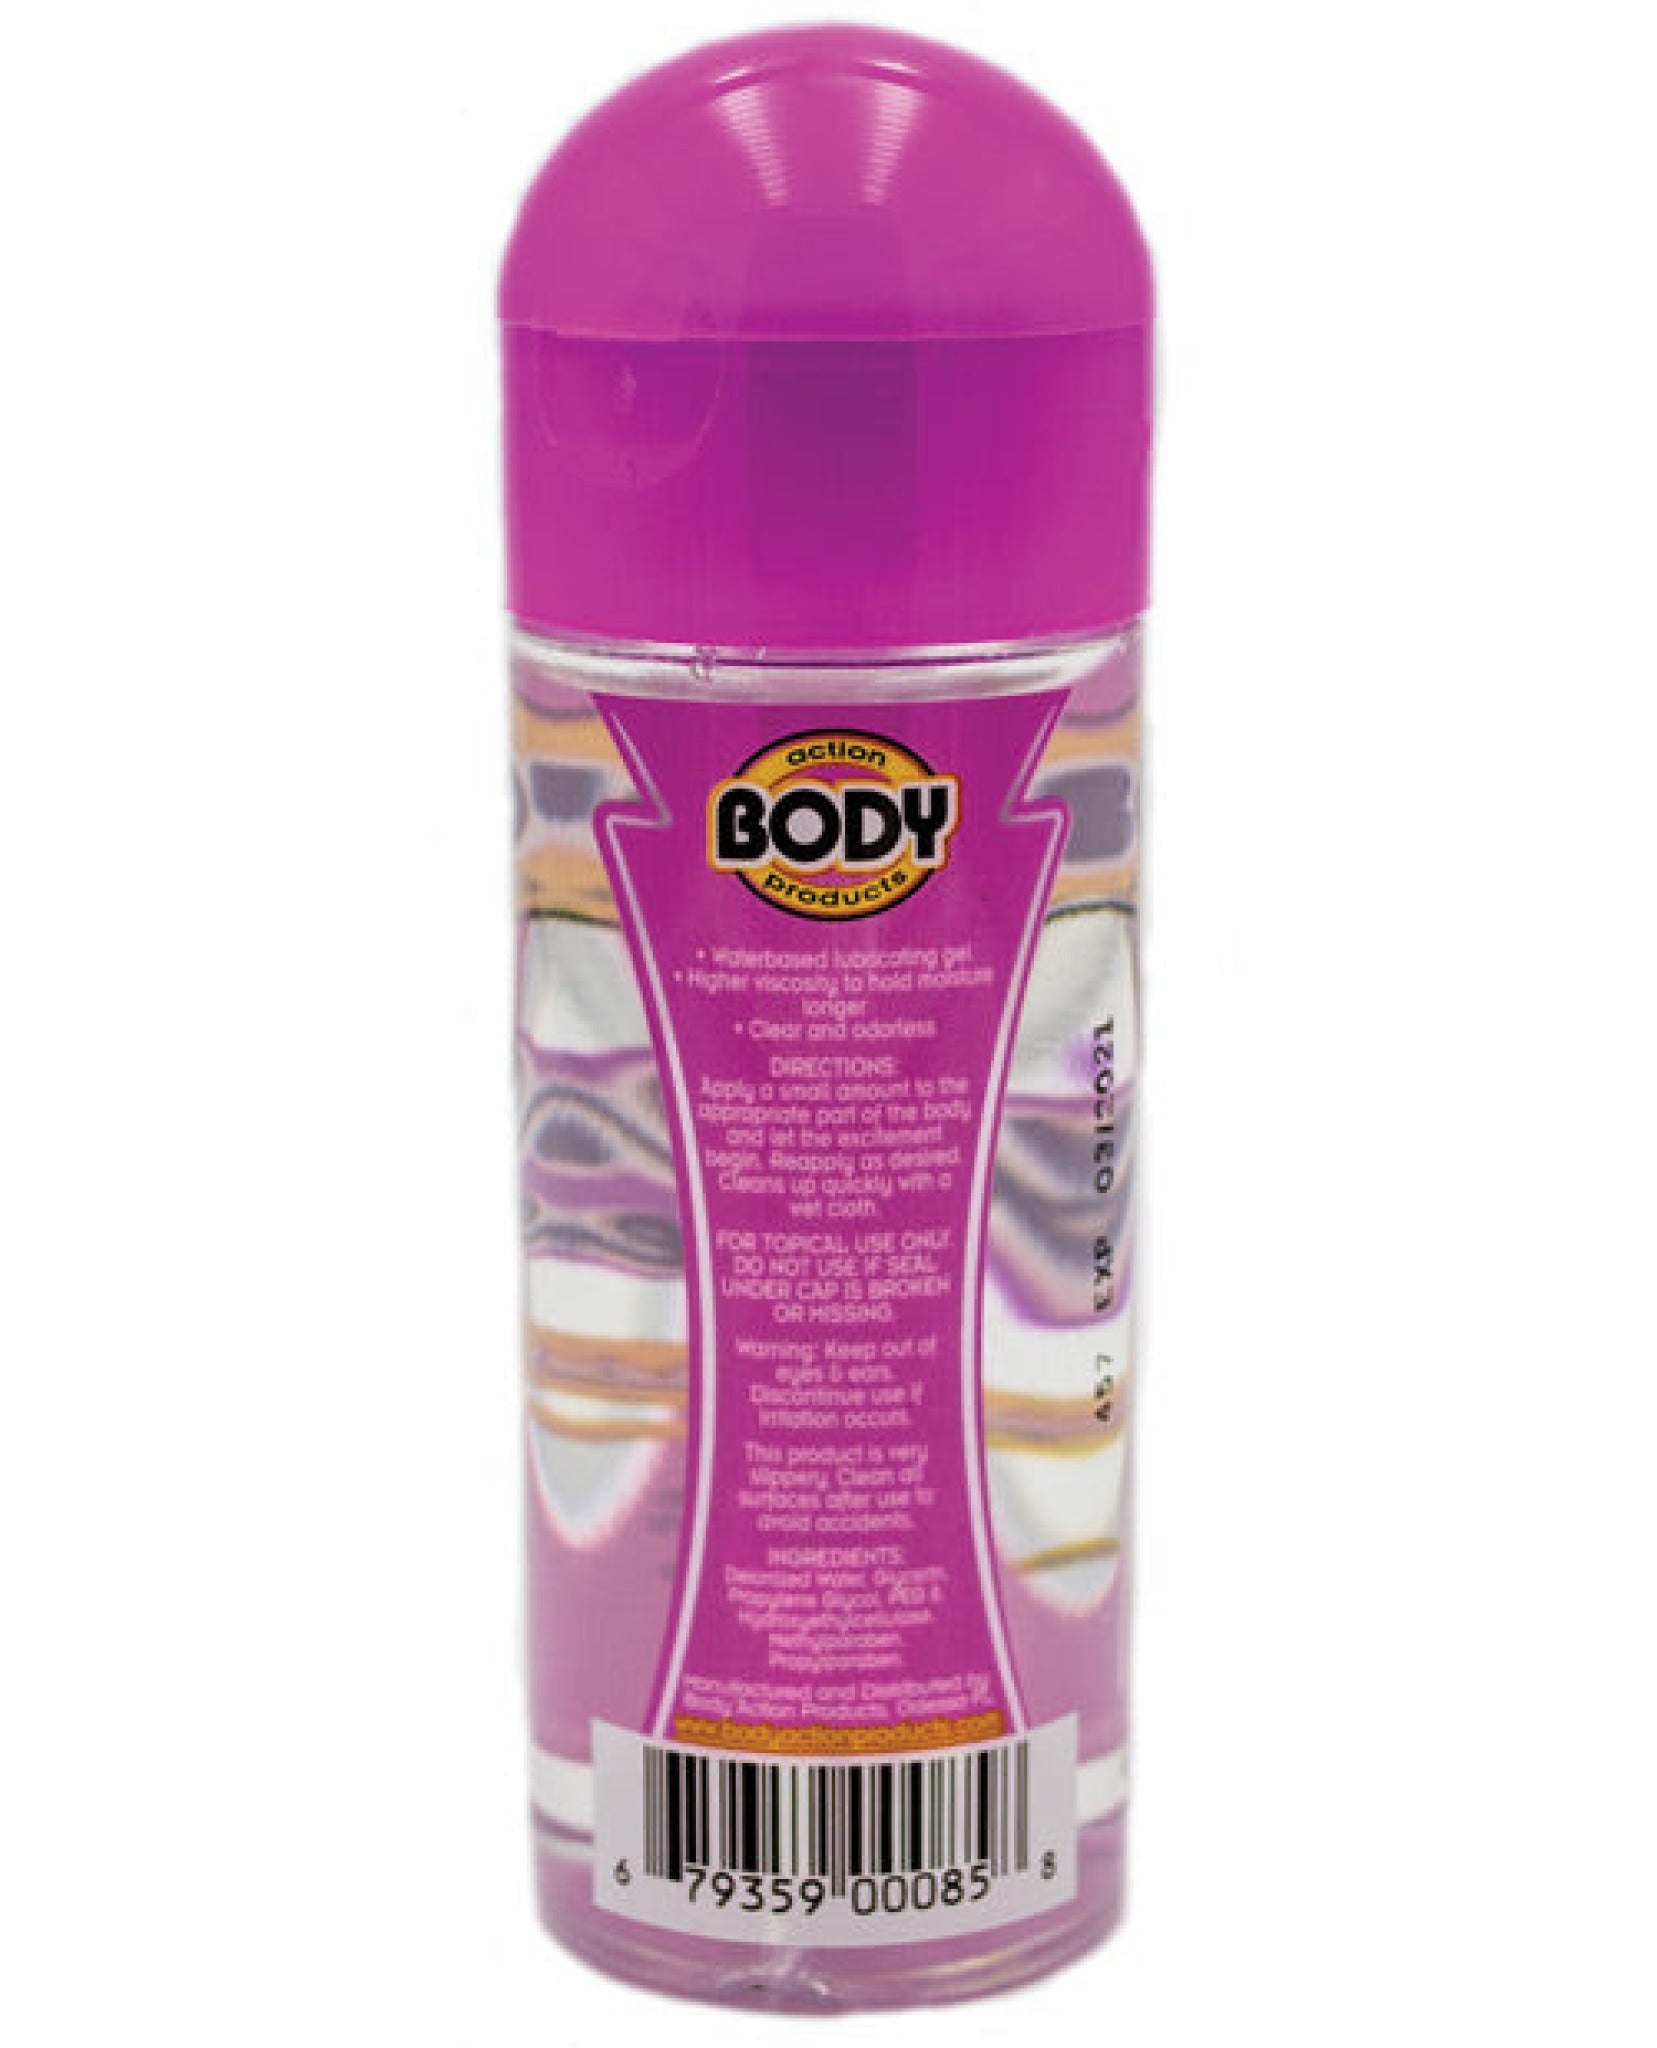 Body Action Supreme Water Based Gel Body Action